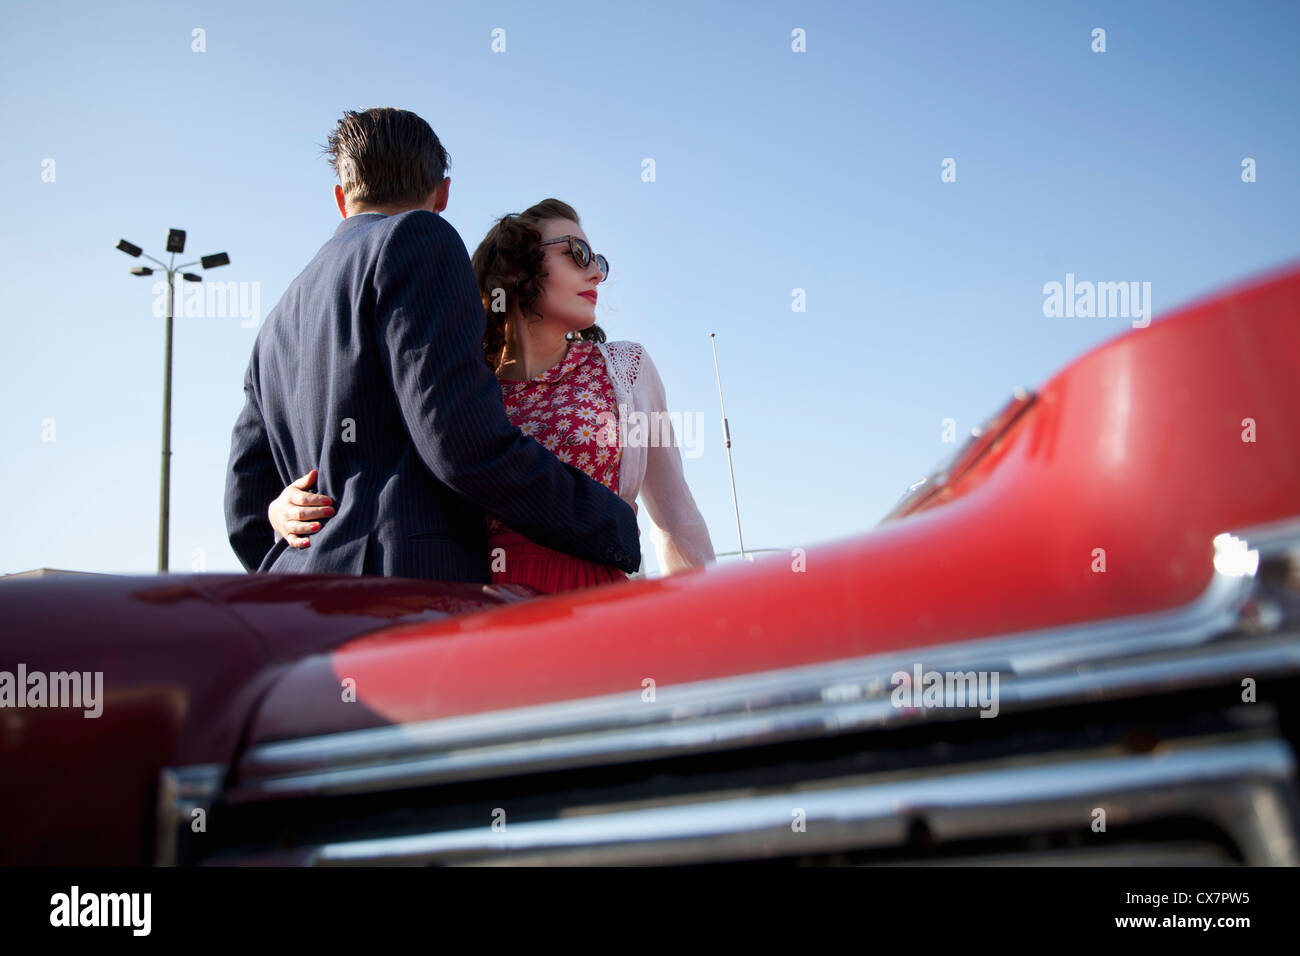 A cool, rockabilly couple with arms around each other by a vintage car Stock Photo